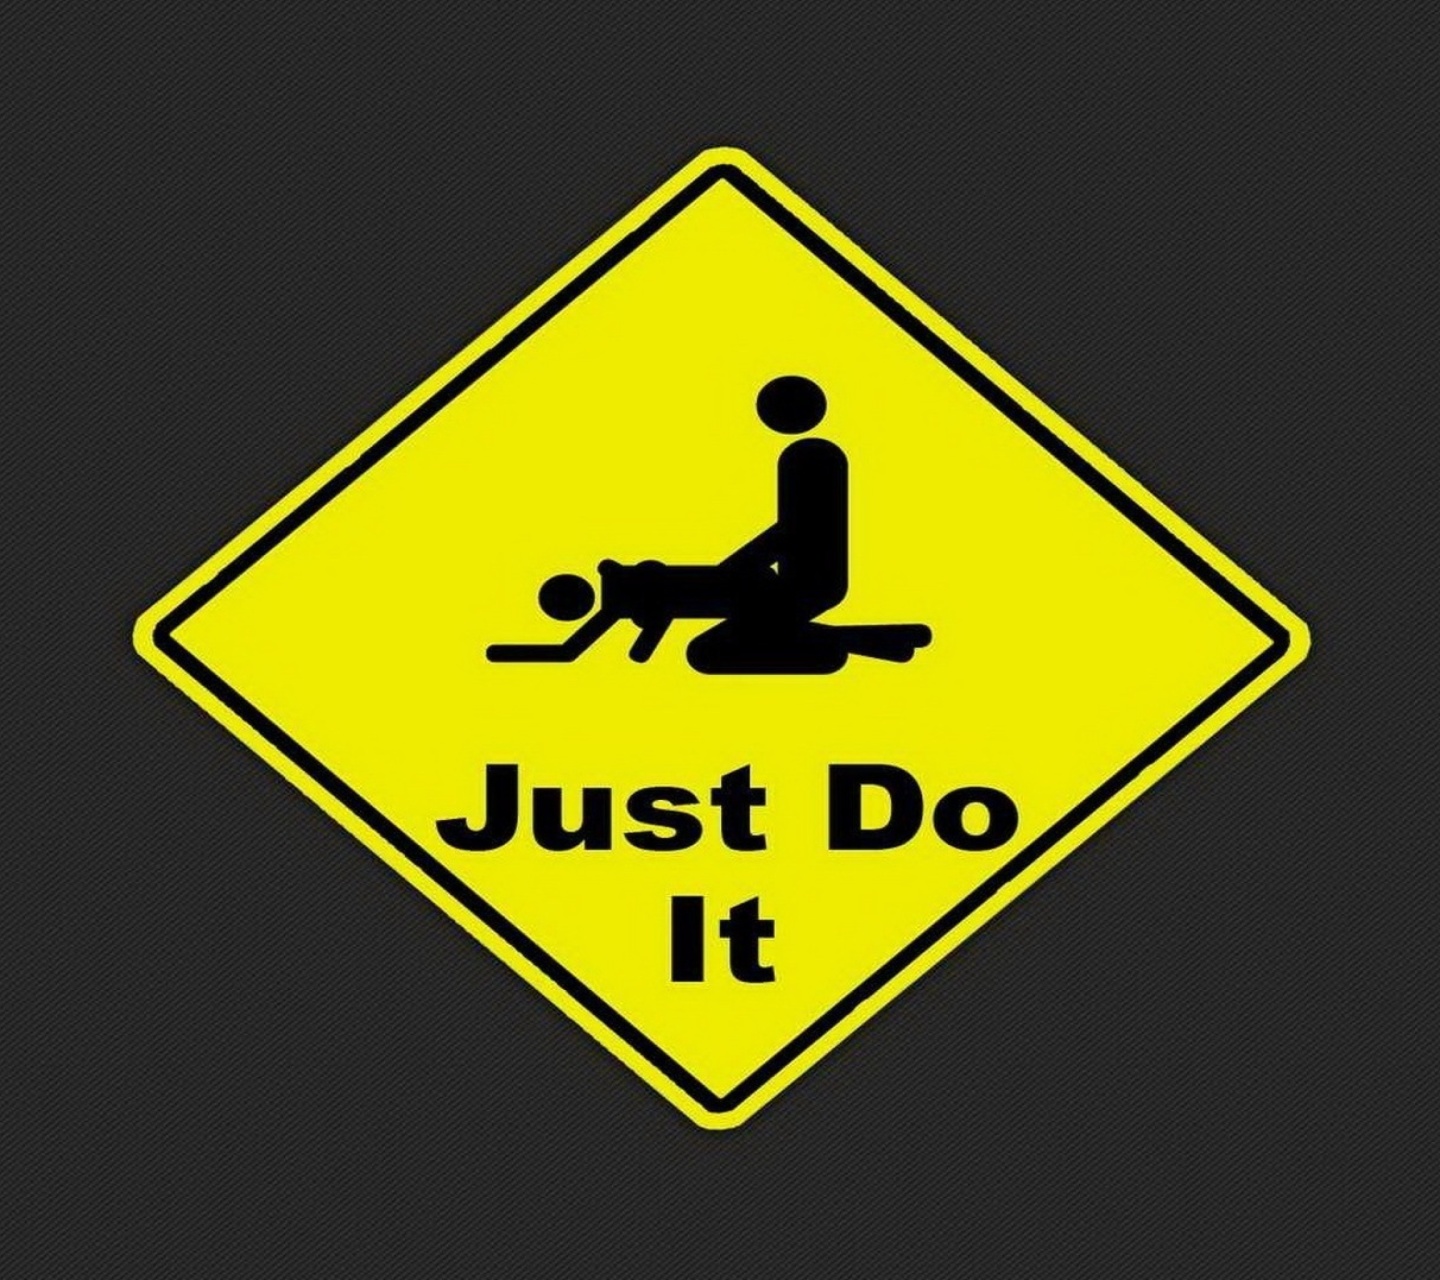 Just Do It Funny Sign screenshot #1 1440x1280